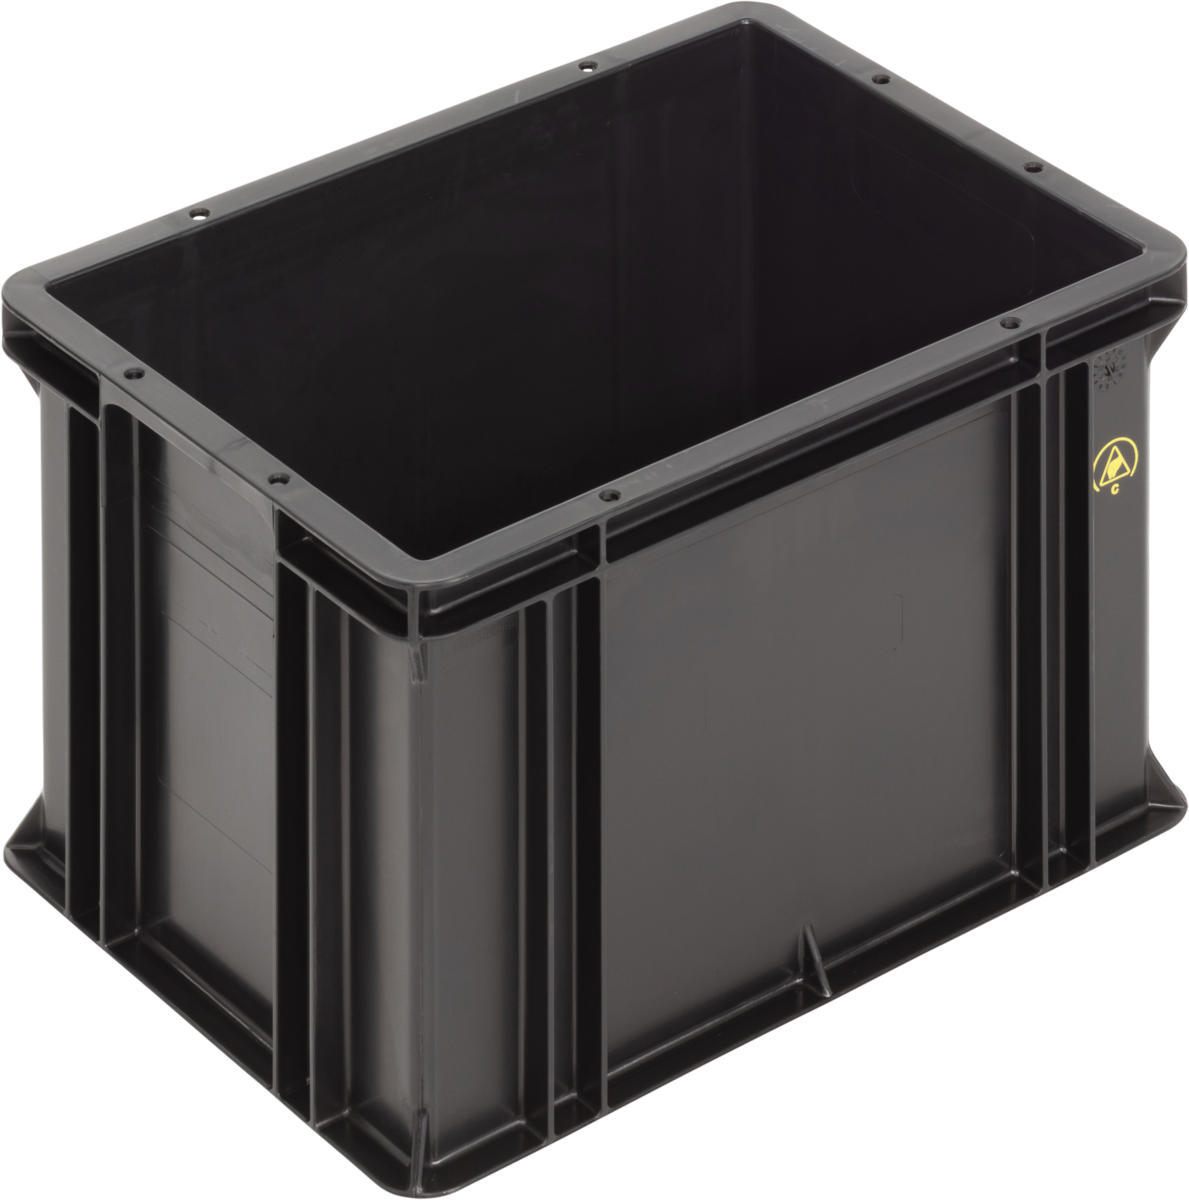 Anti-Static-ESD-Antistatic-Safe-SGL-Norm-Stacking-Bin-Containers-Flat-Base-Ref.-4326.007.992_1004402_400x300x278_01